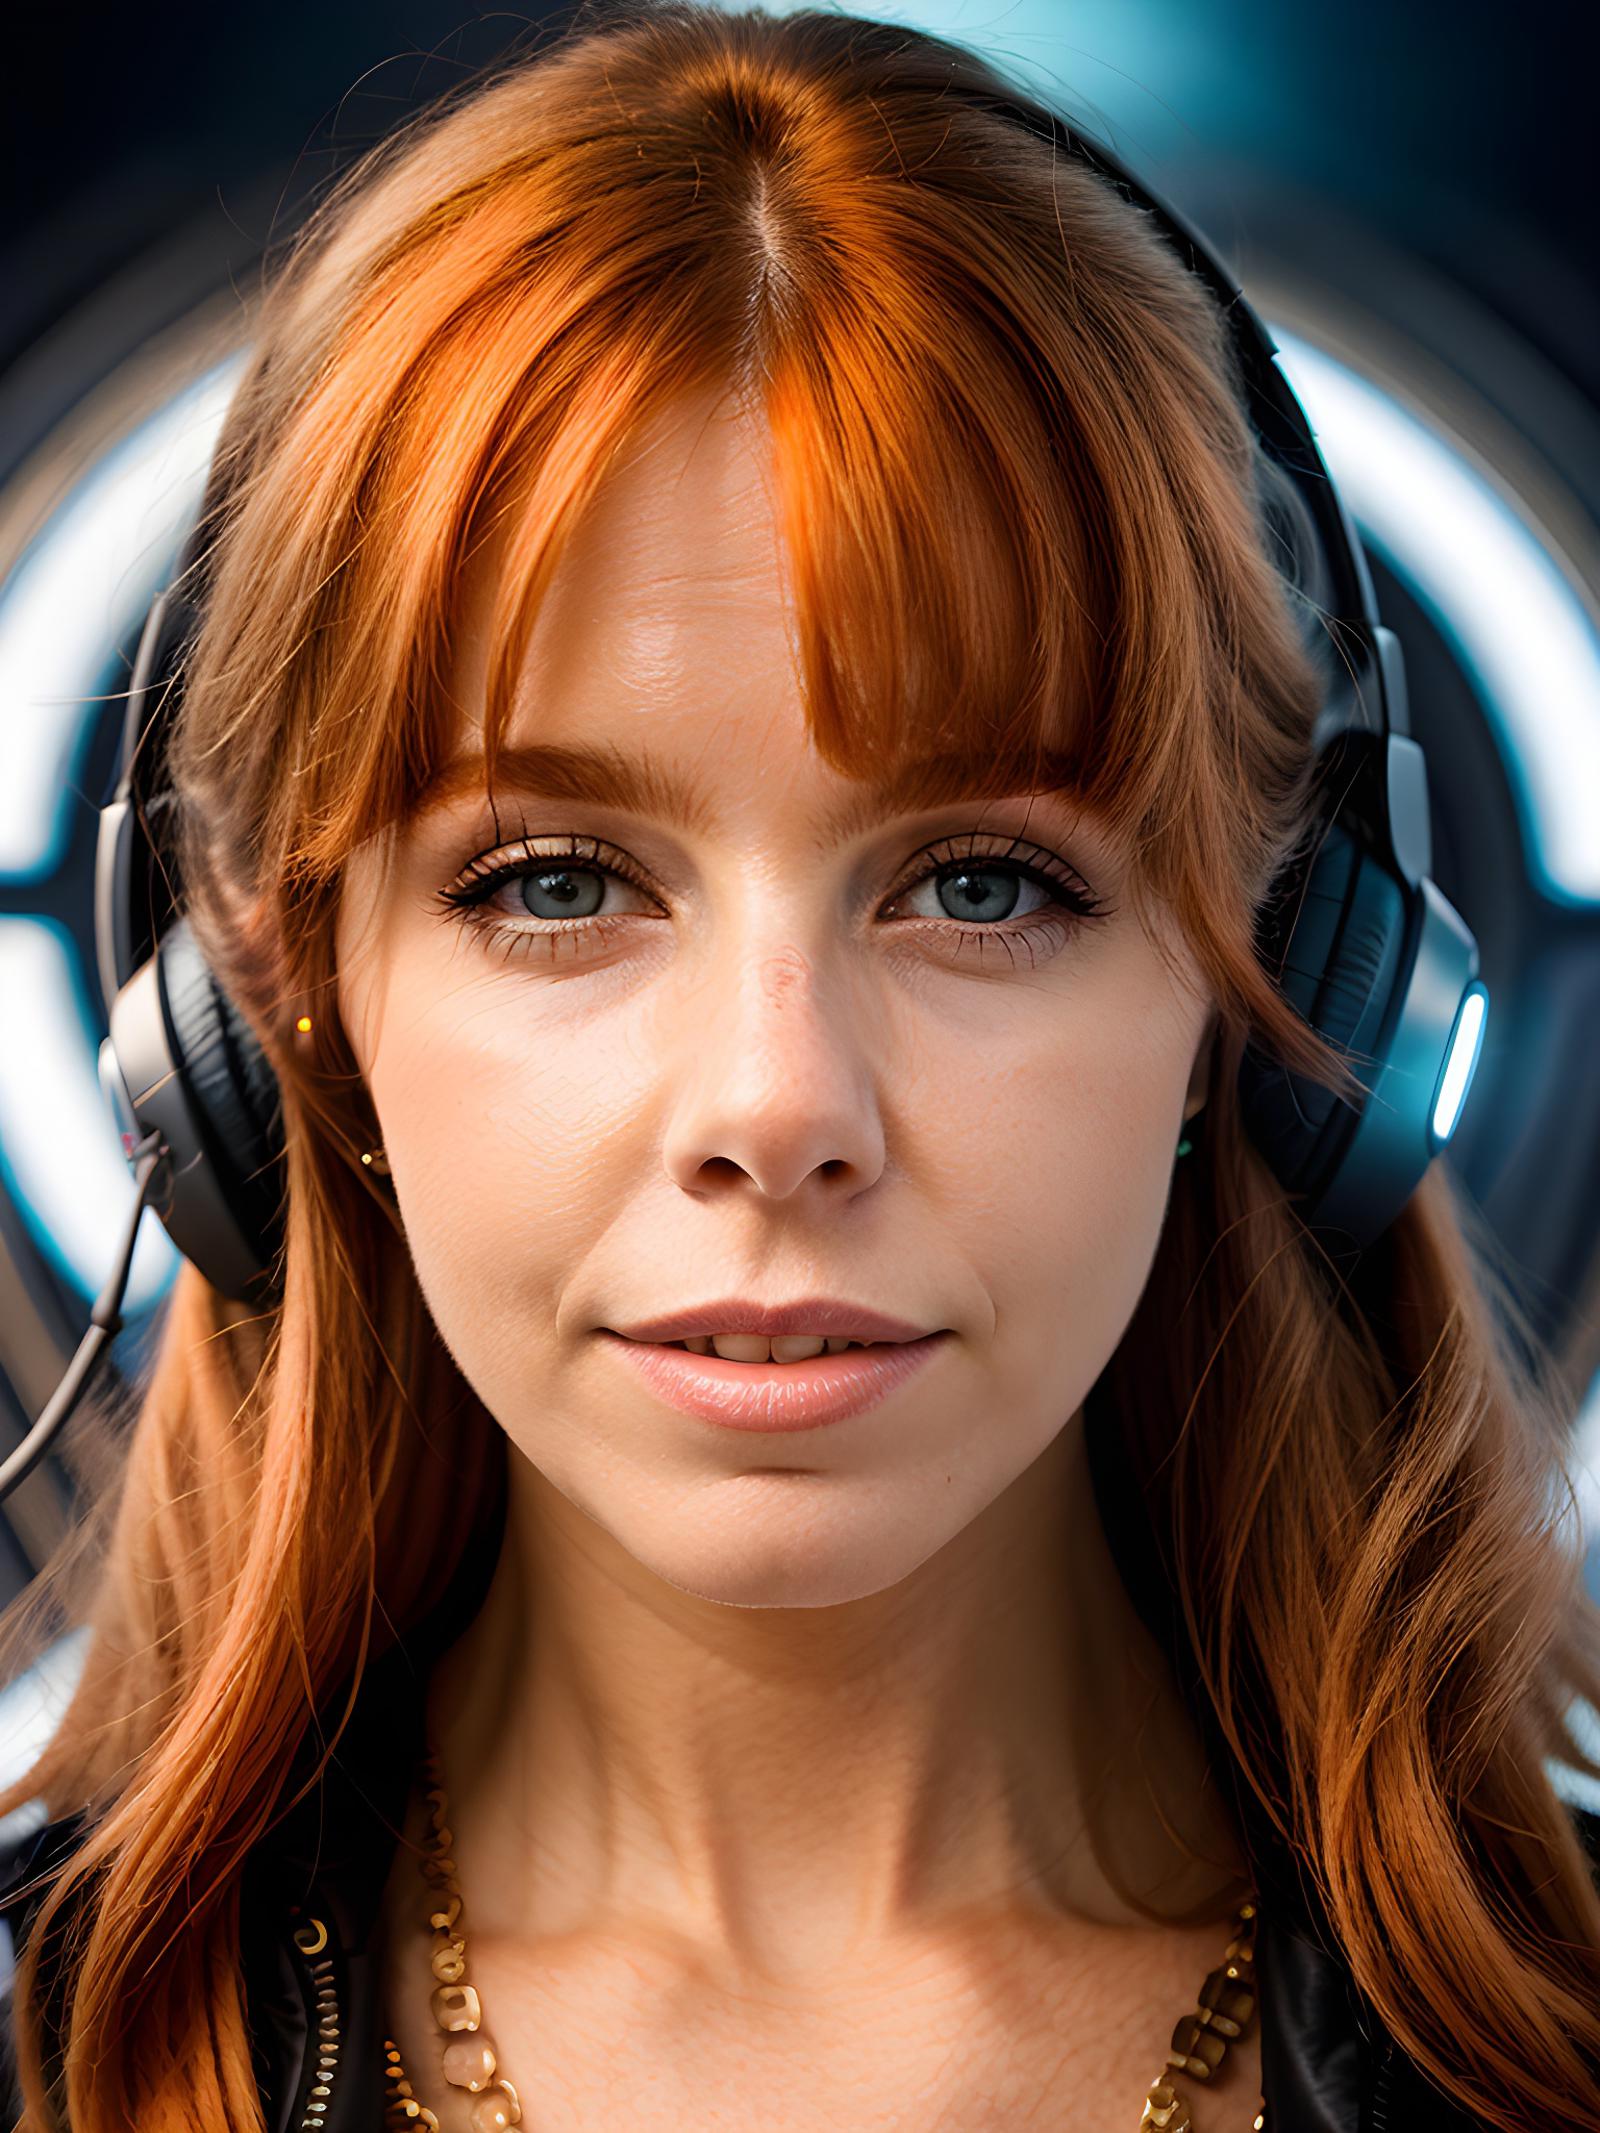 Stacey Dooley image by fraggle